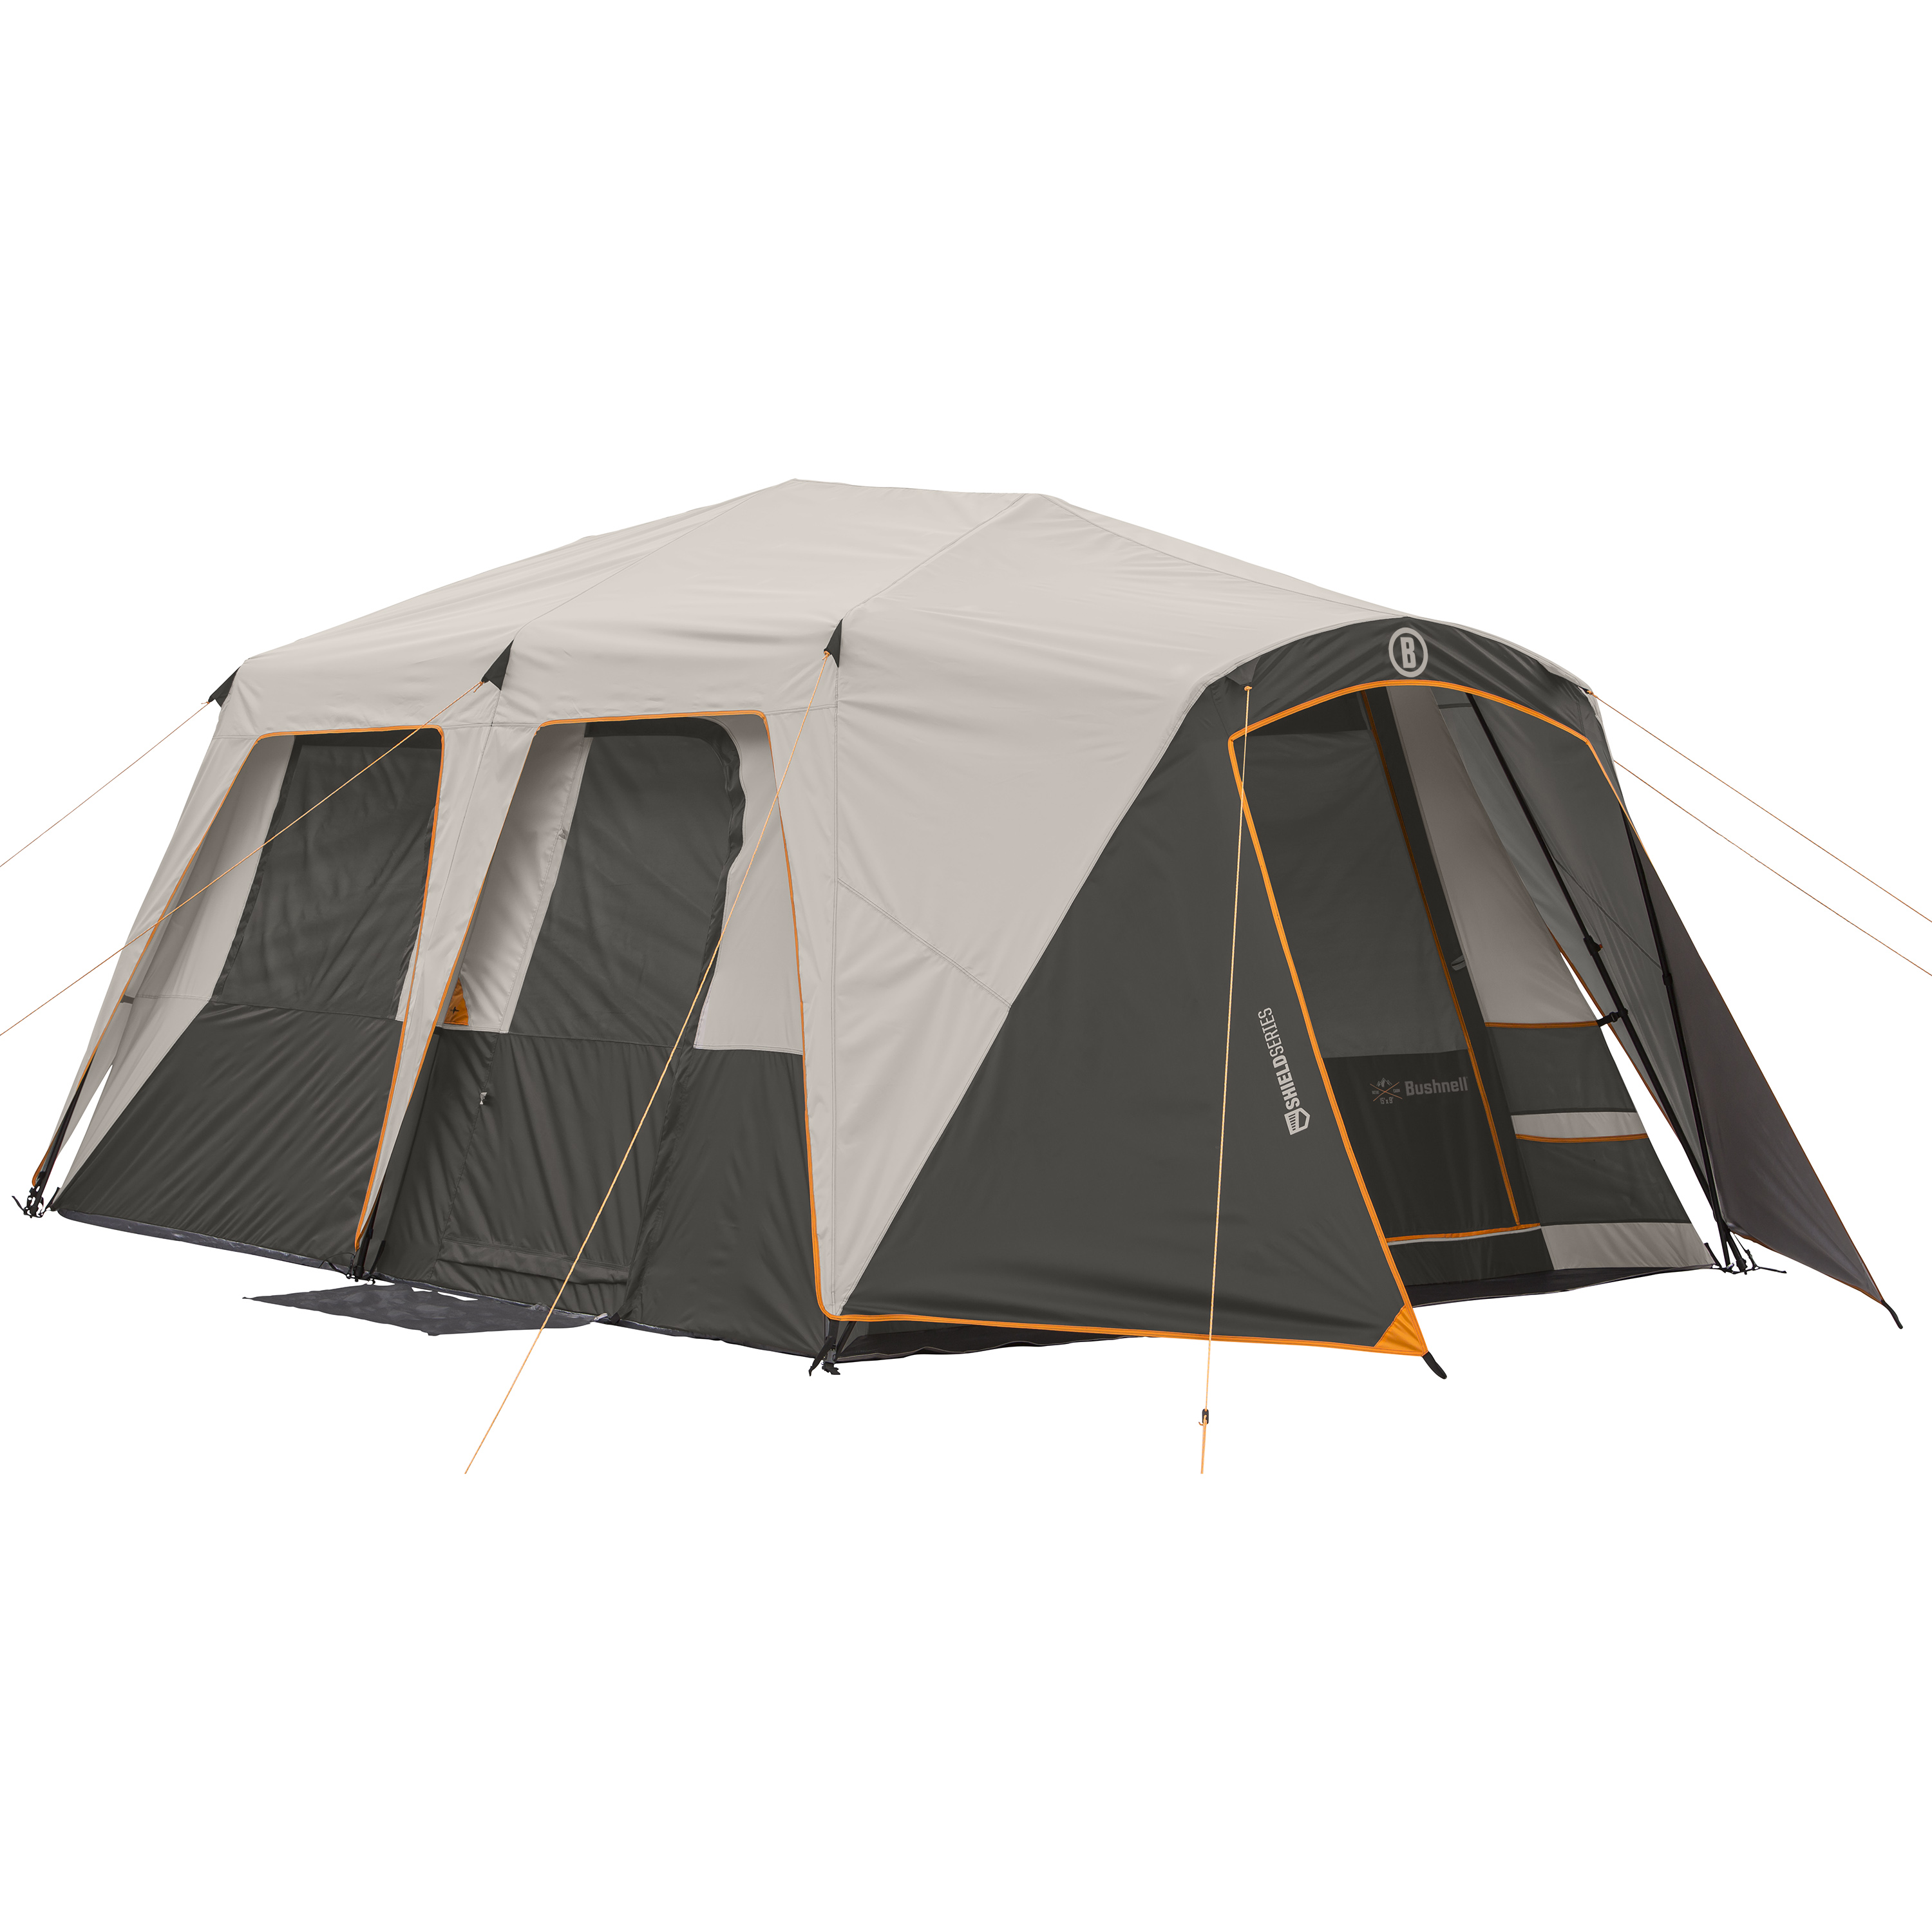 Bushnell Shield Series 9 Person Instant Cabin Tent - image 1 of 9